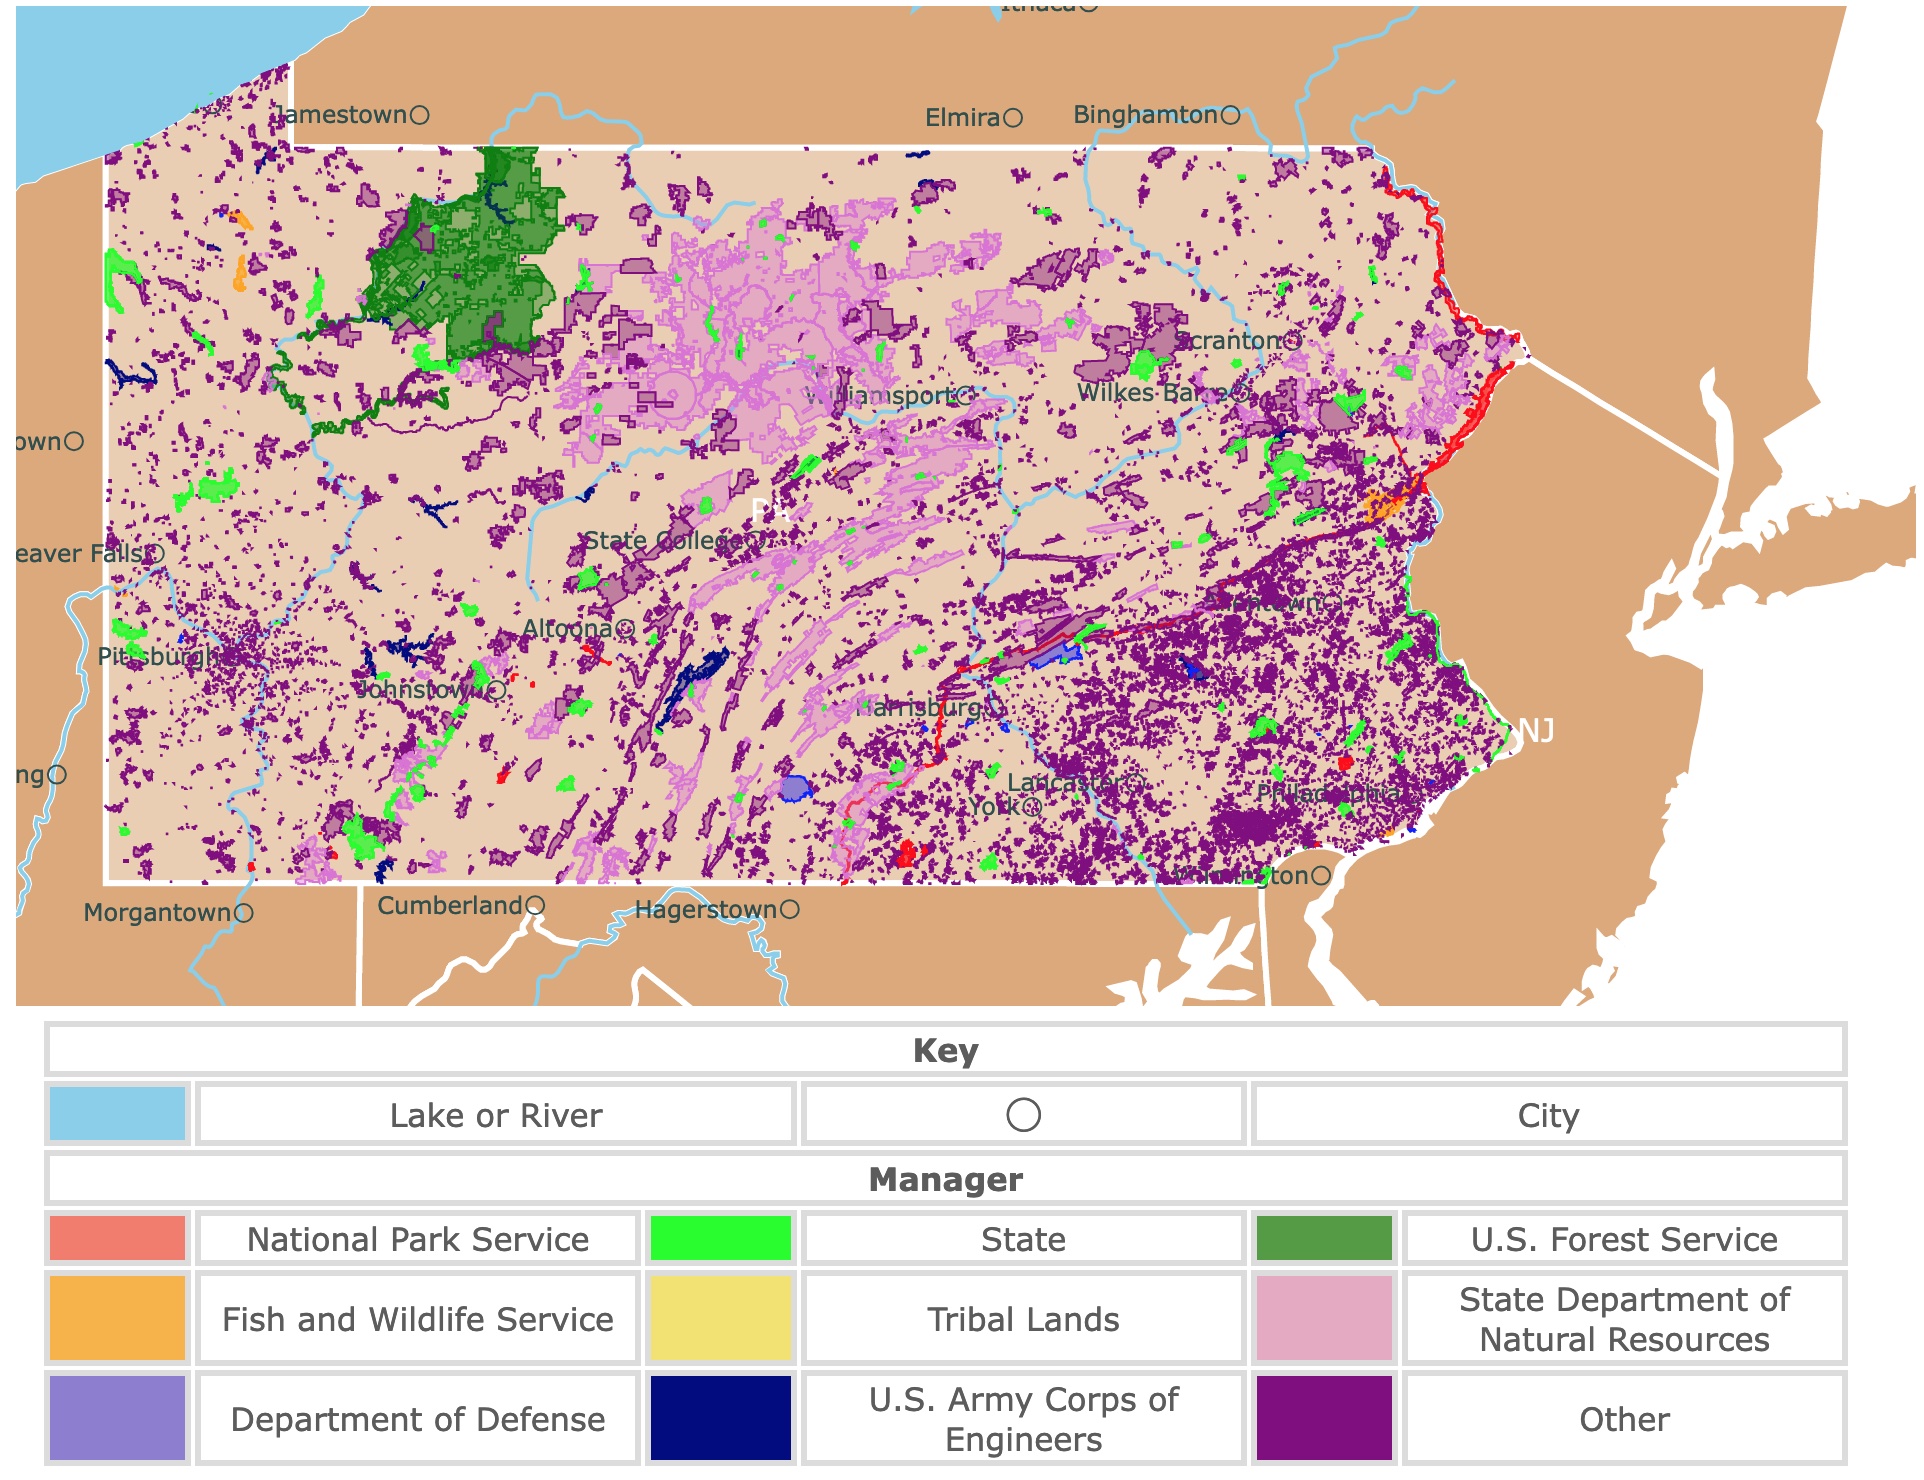 Map of Pennsylvania's state parks, national parks, forests, and public lands areas